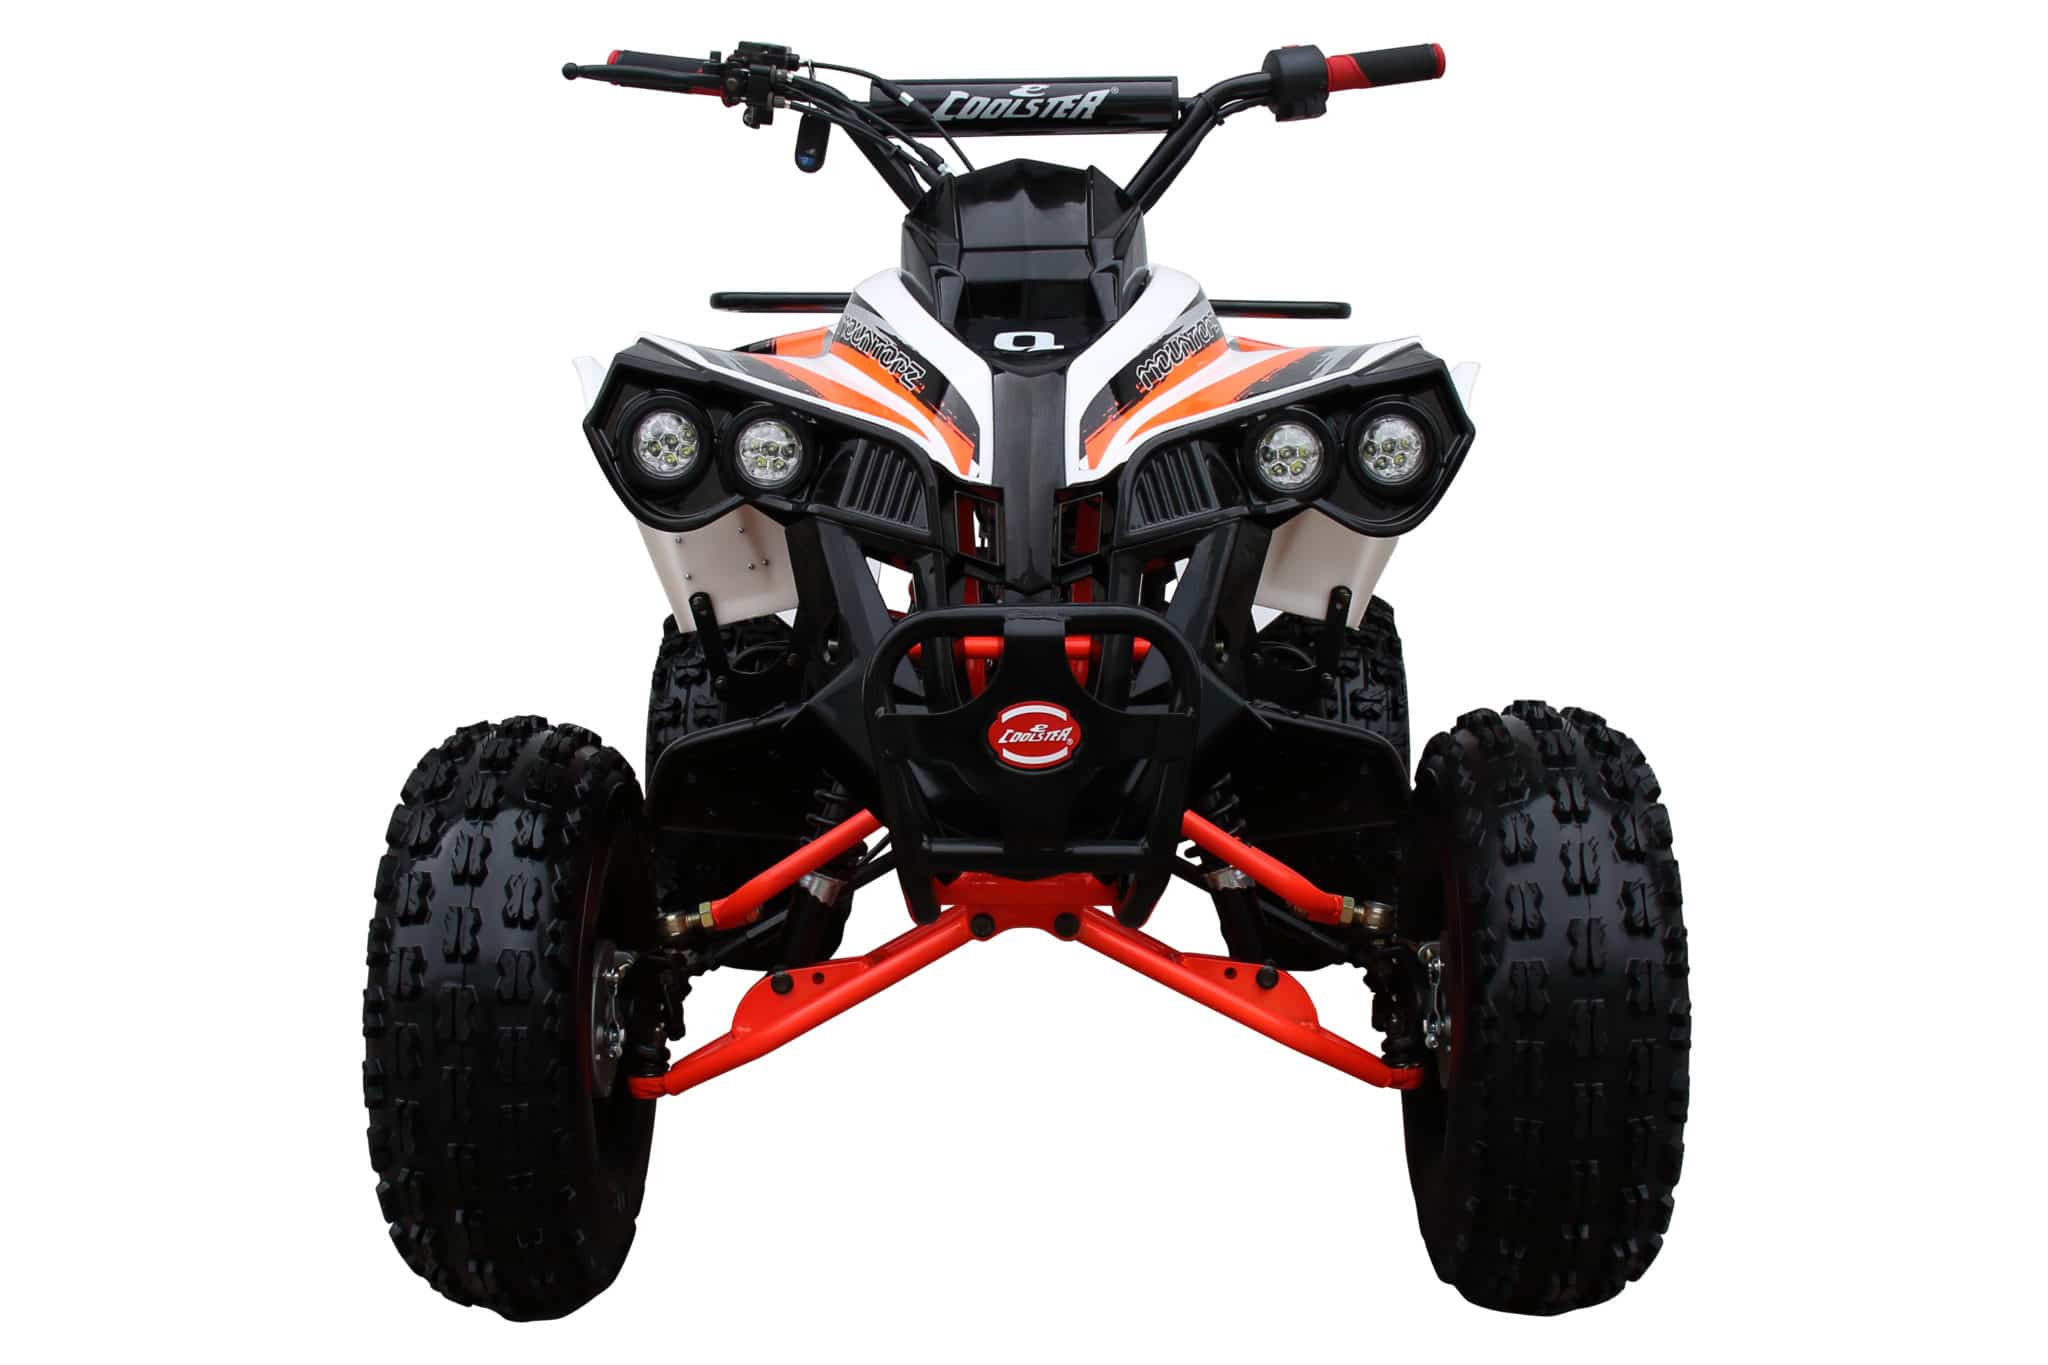 Coolster ATV-3125B2 / 125cc Fully Automatic Mid Sized ATV